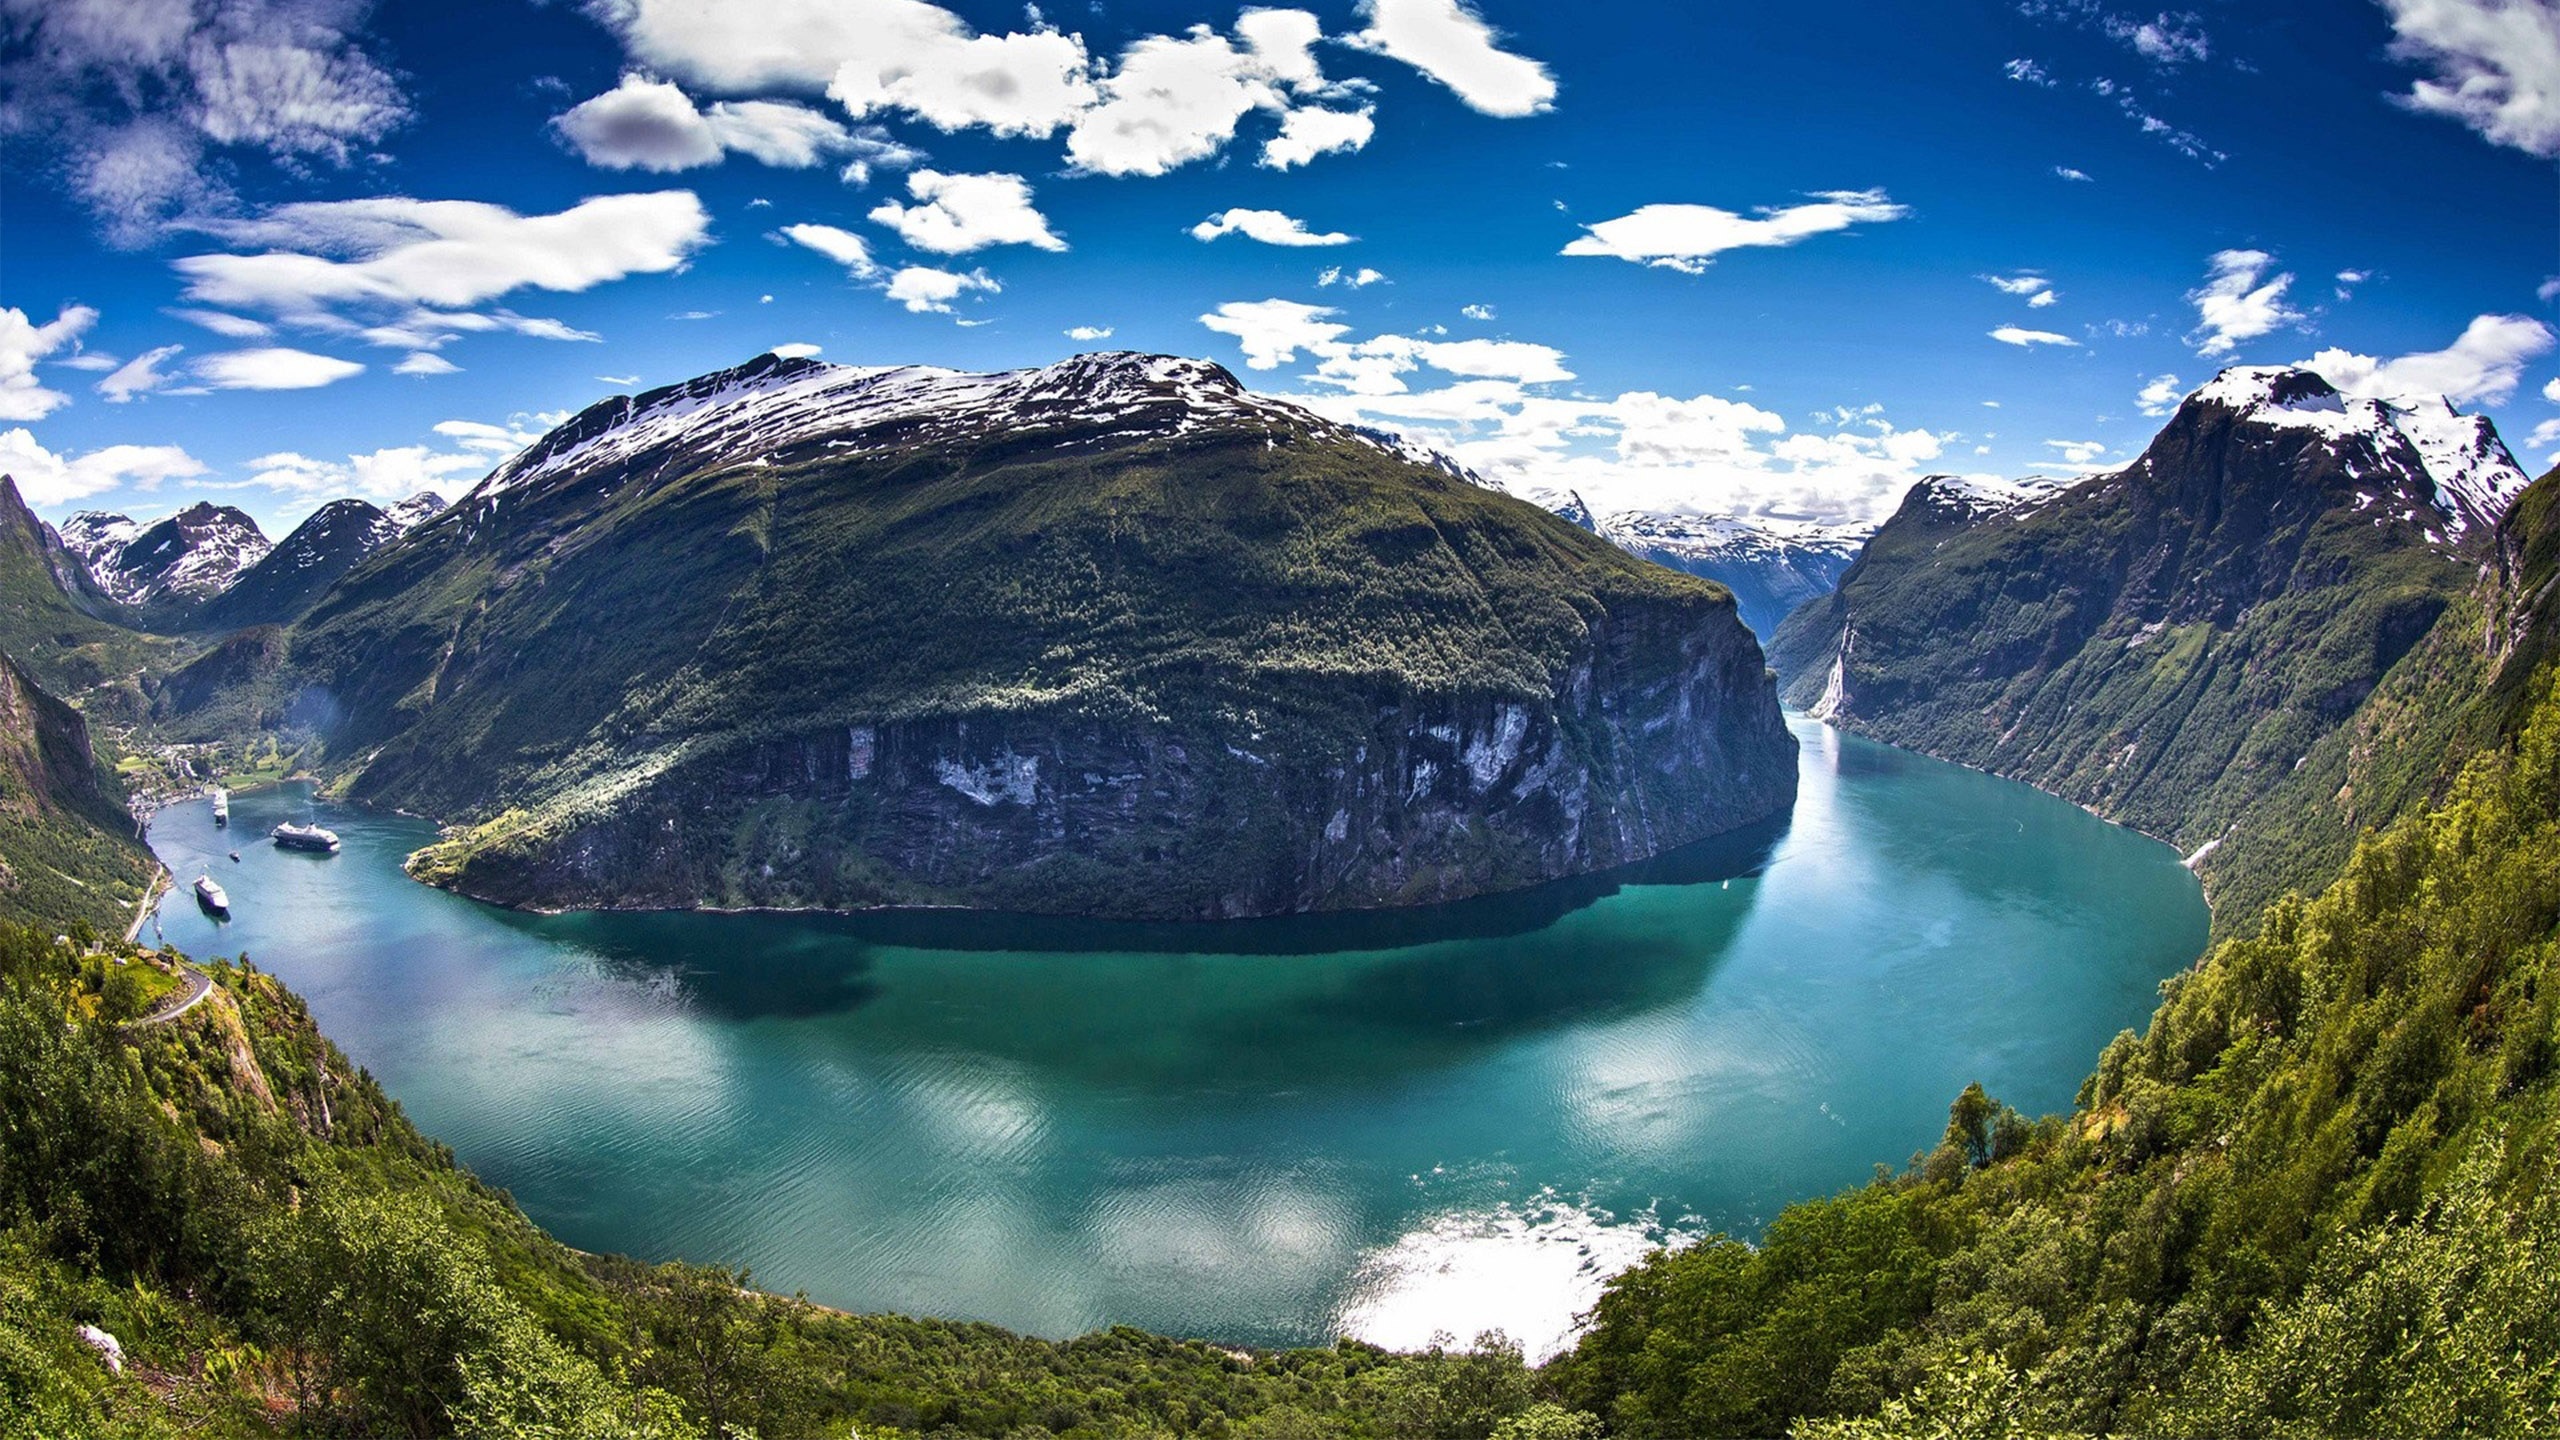 Geirangerfjord's Fjord In The Sunnmore Region Of The Romsdal Norway